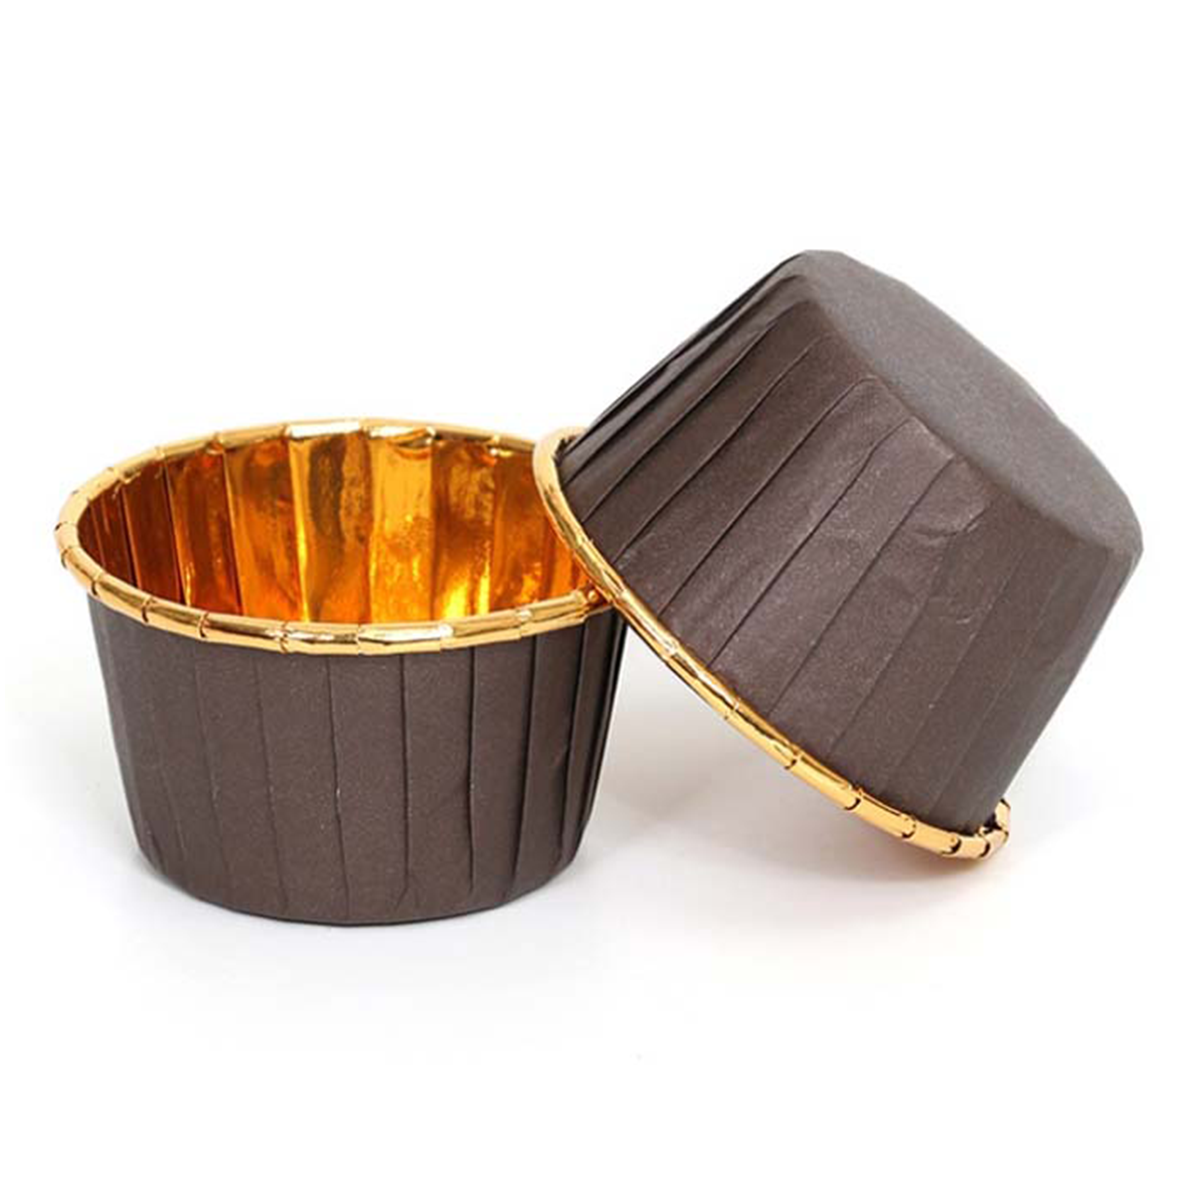 50Pcs Disposable Aluminum Foil Baking Cups Muffin Cup Cake Wrappers - WILLOW